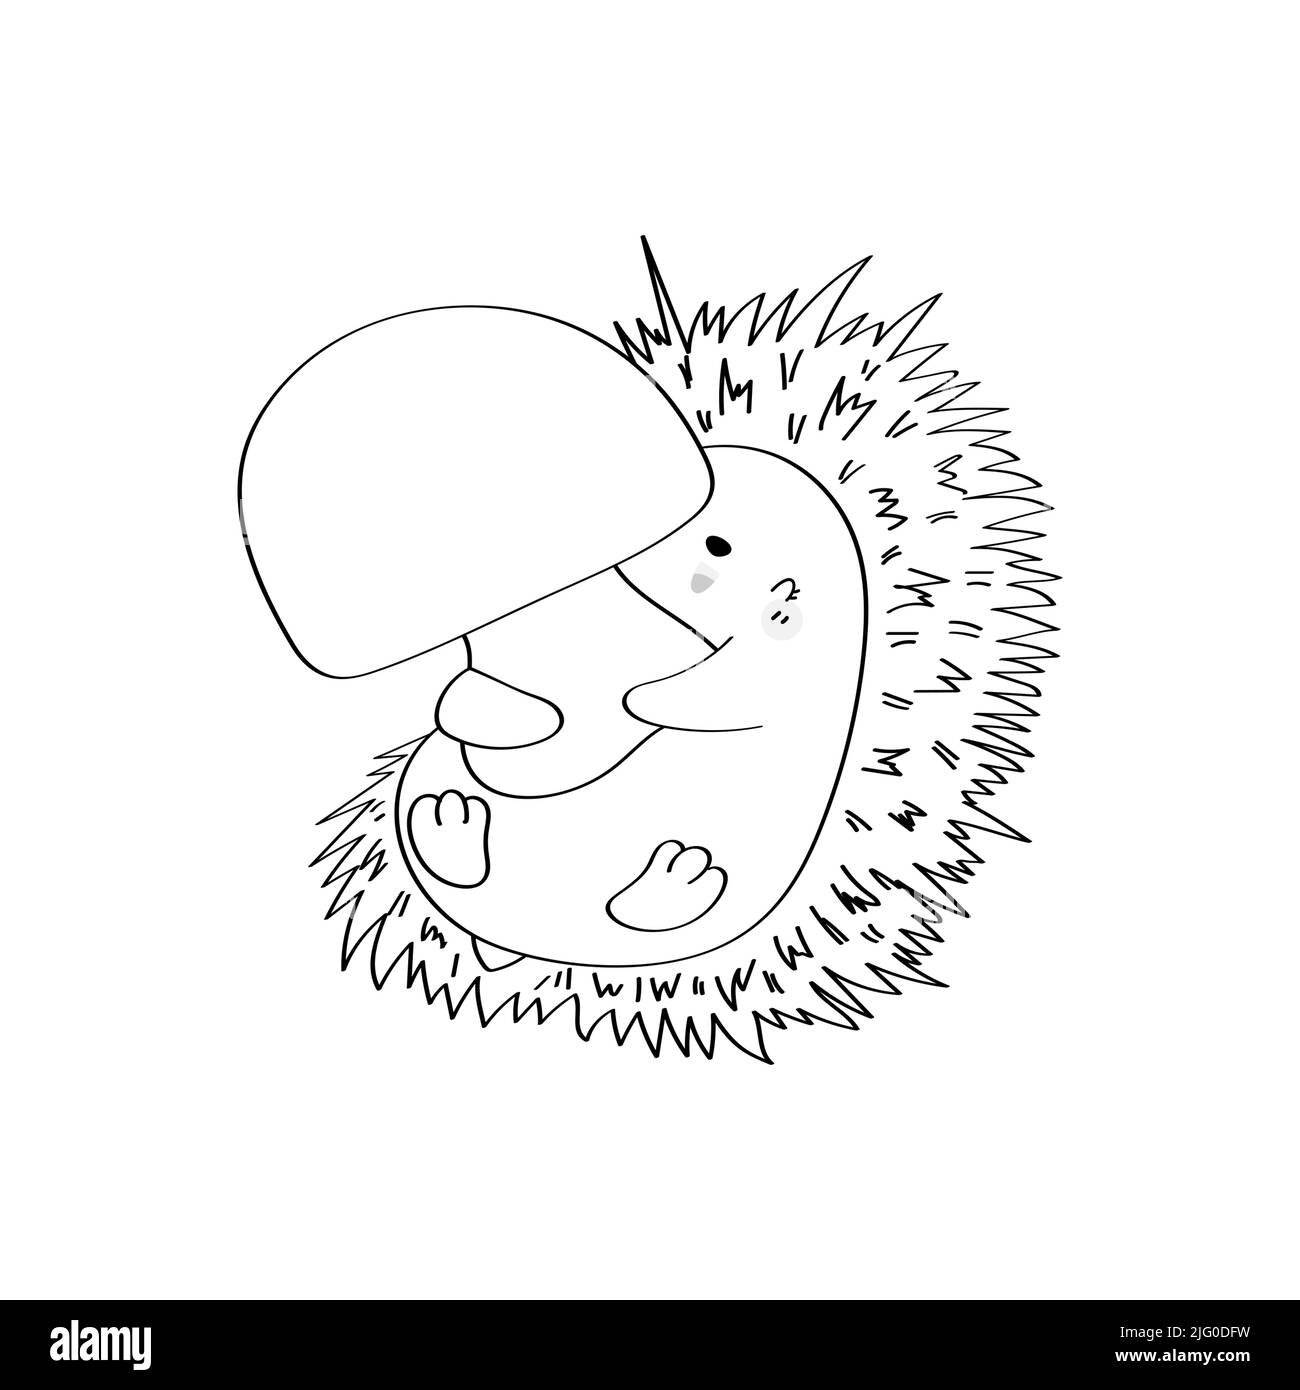 Black and White Hedgehog Clipart in Cute Cartoon Style Beautiful Clip Art Coloring Page Hedgehog . Vector Illustration of an Forest Animal for Prints Stock Vector